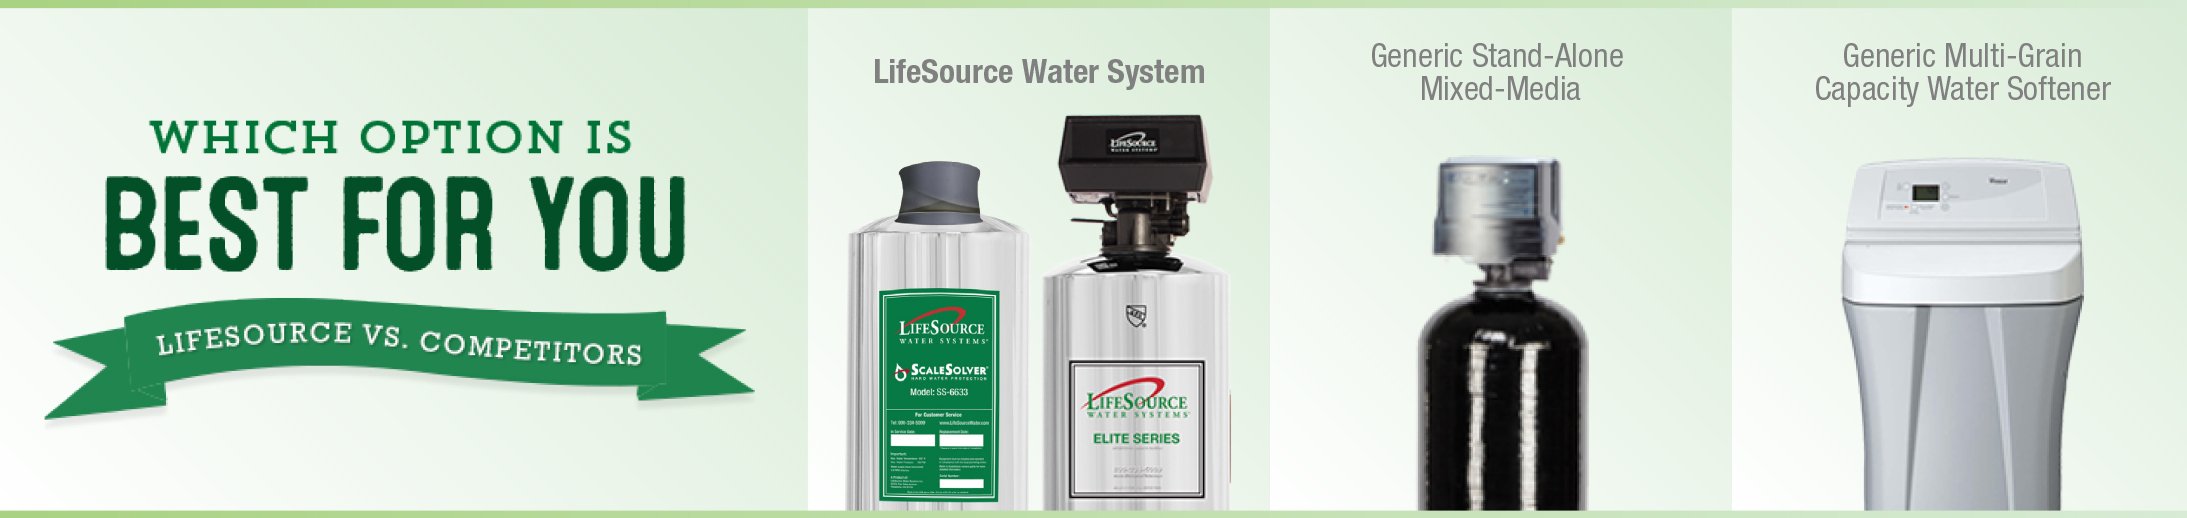 a banner of tanks comparing lifesource with its competitors